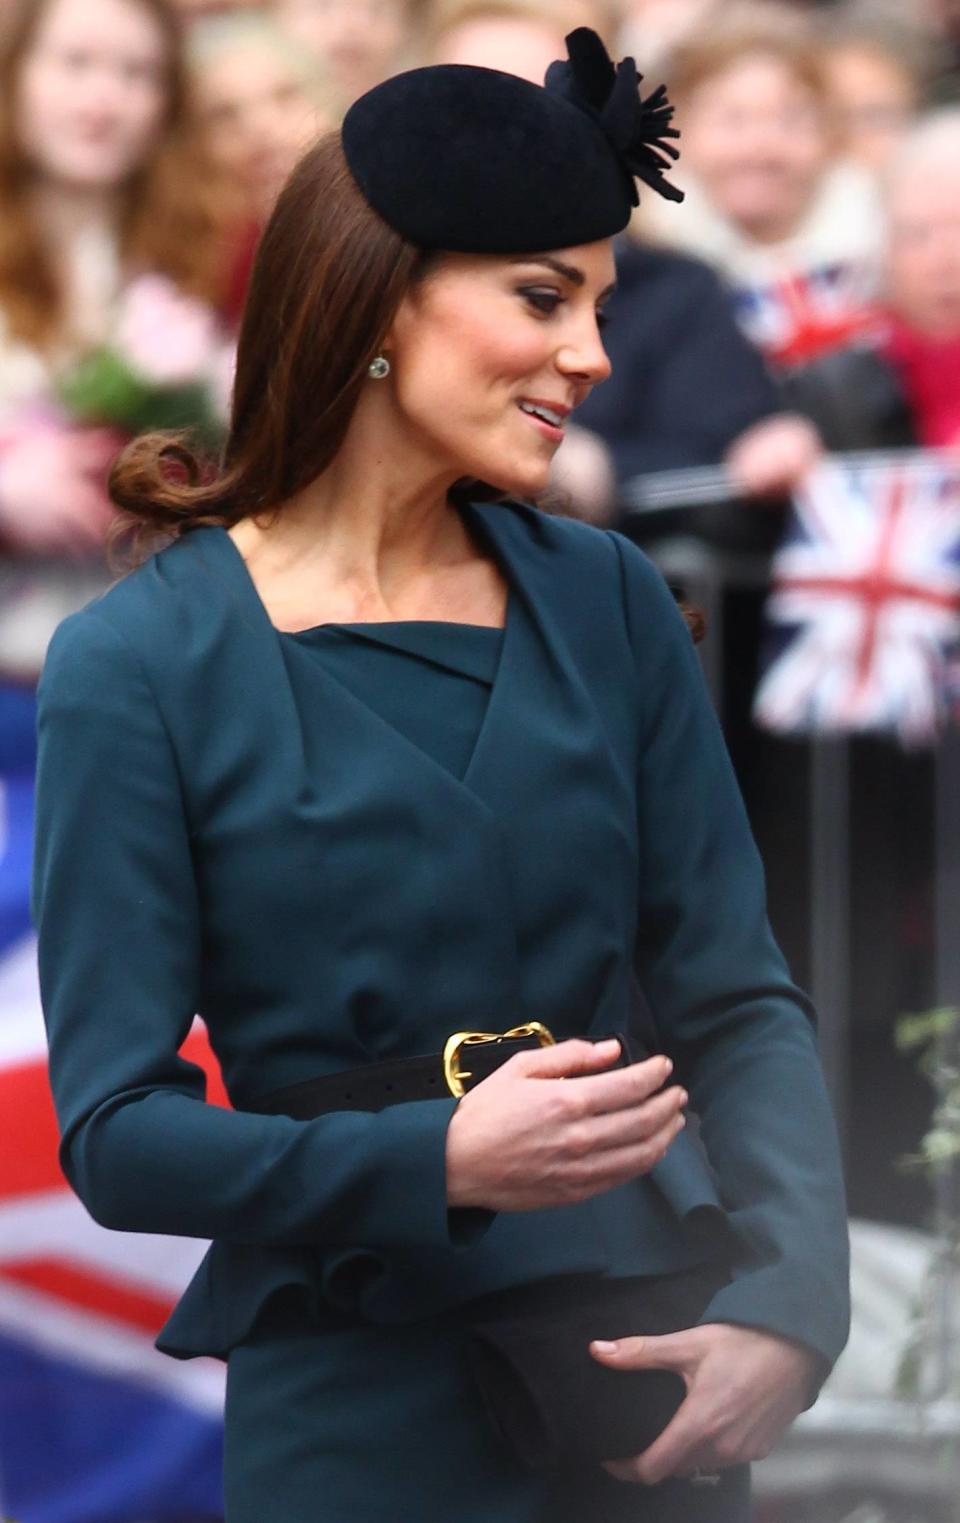 Catherine Duchess of Cambridge, aka Kate Middleton at Leicester City centre on March 8, 2012.   
The Queen and members of the Royal family are visiting Leicester as part of her Diamond Jubilee Tour
Leicester, England - 08.03.12
Mandatory Credit: WENN.com